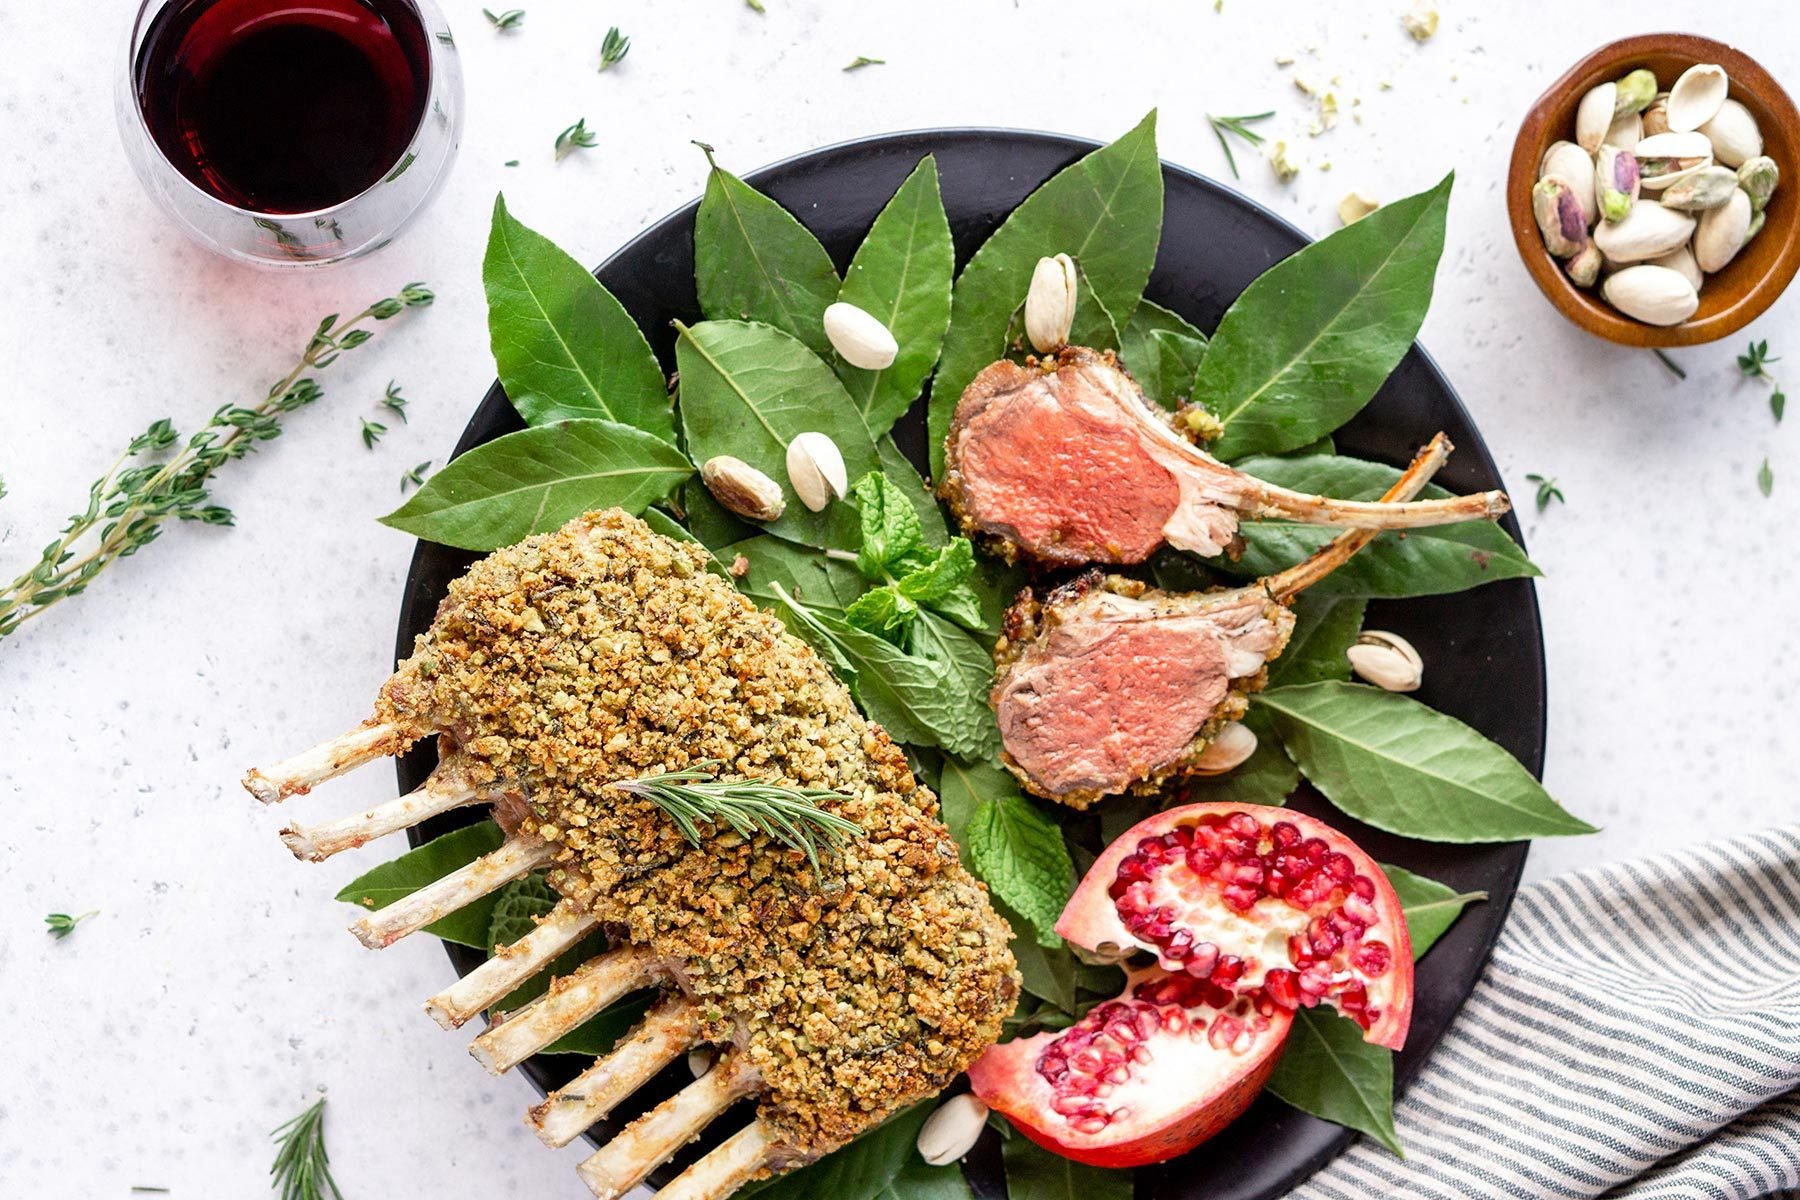 Pistachio-and-Parmesan-Crusted Rack of Lamb